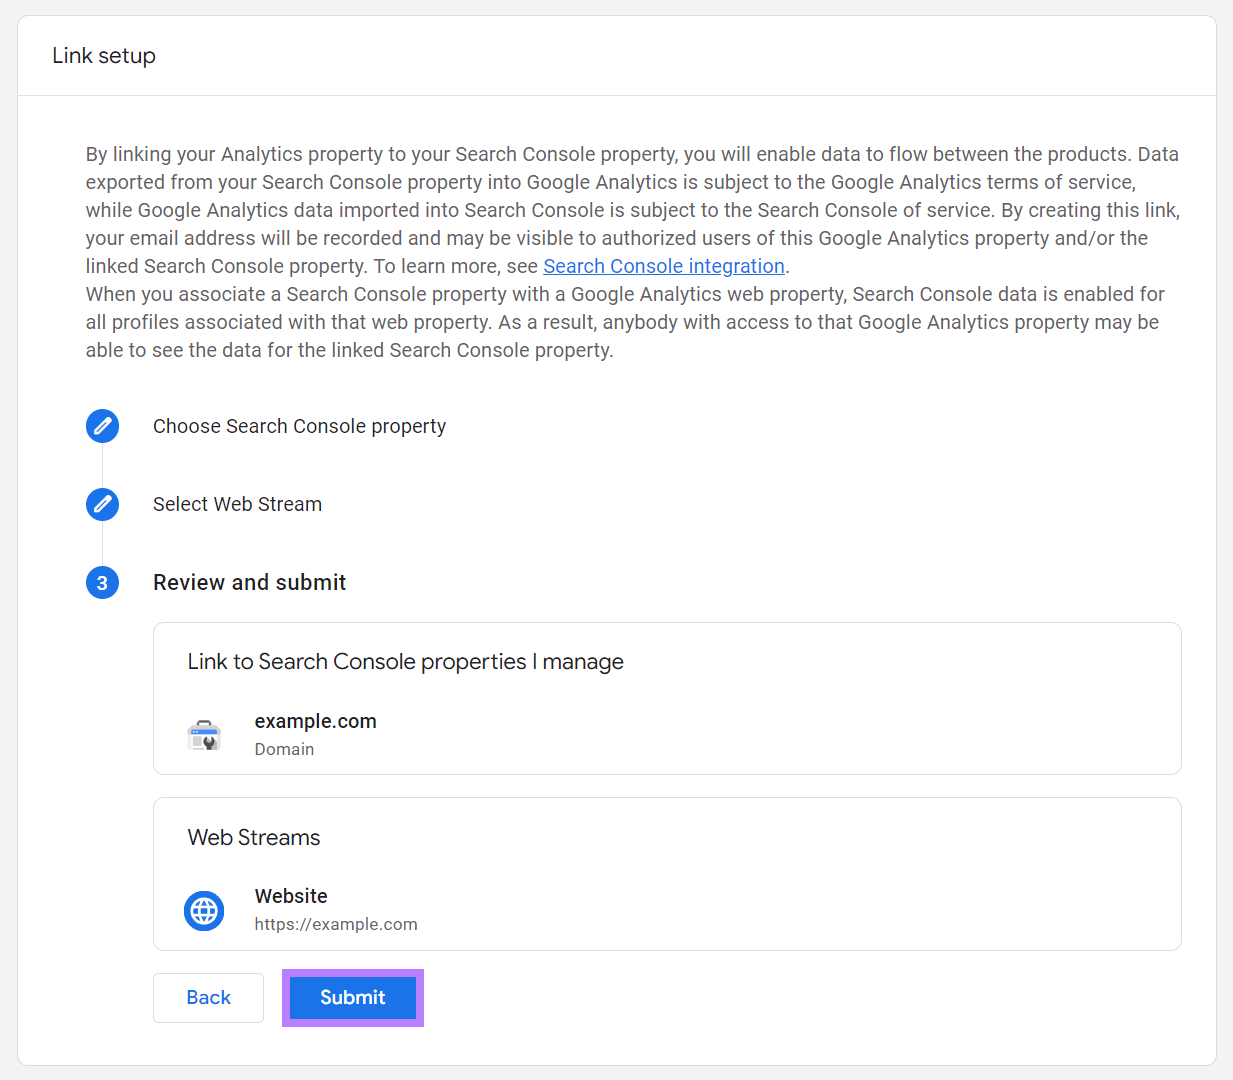 Review and submit step with Submit button highlighted.